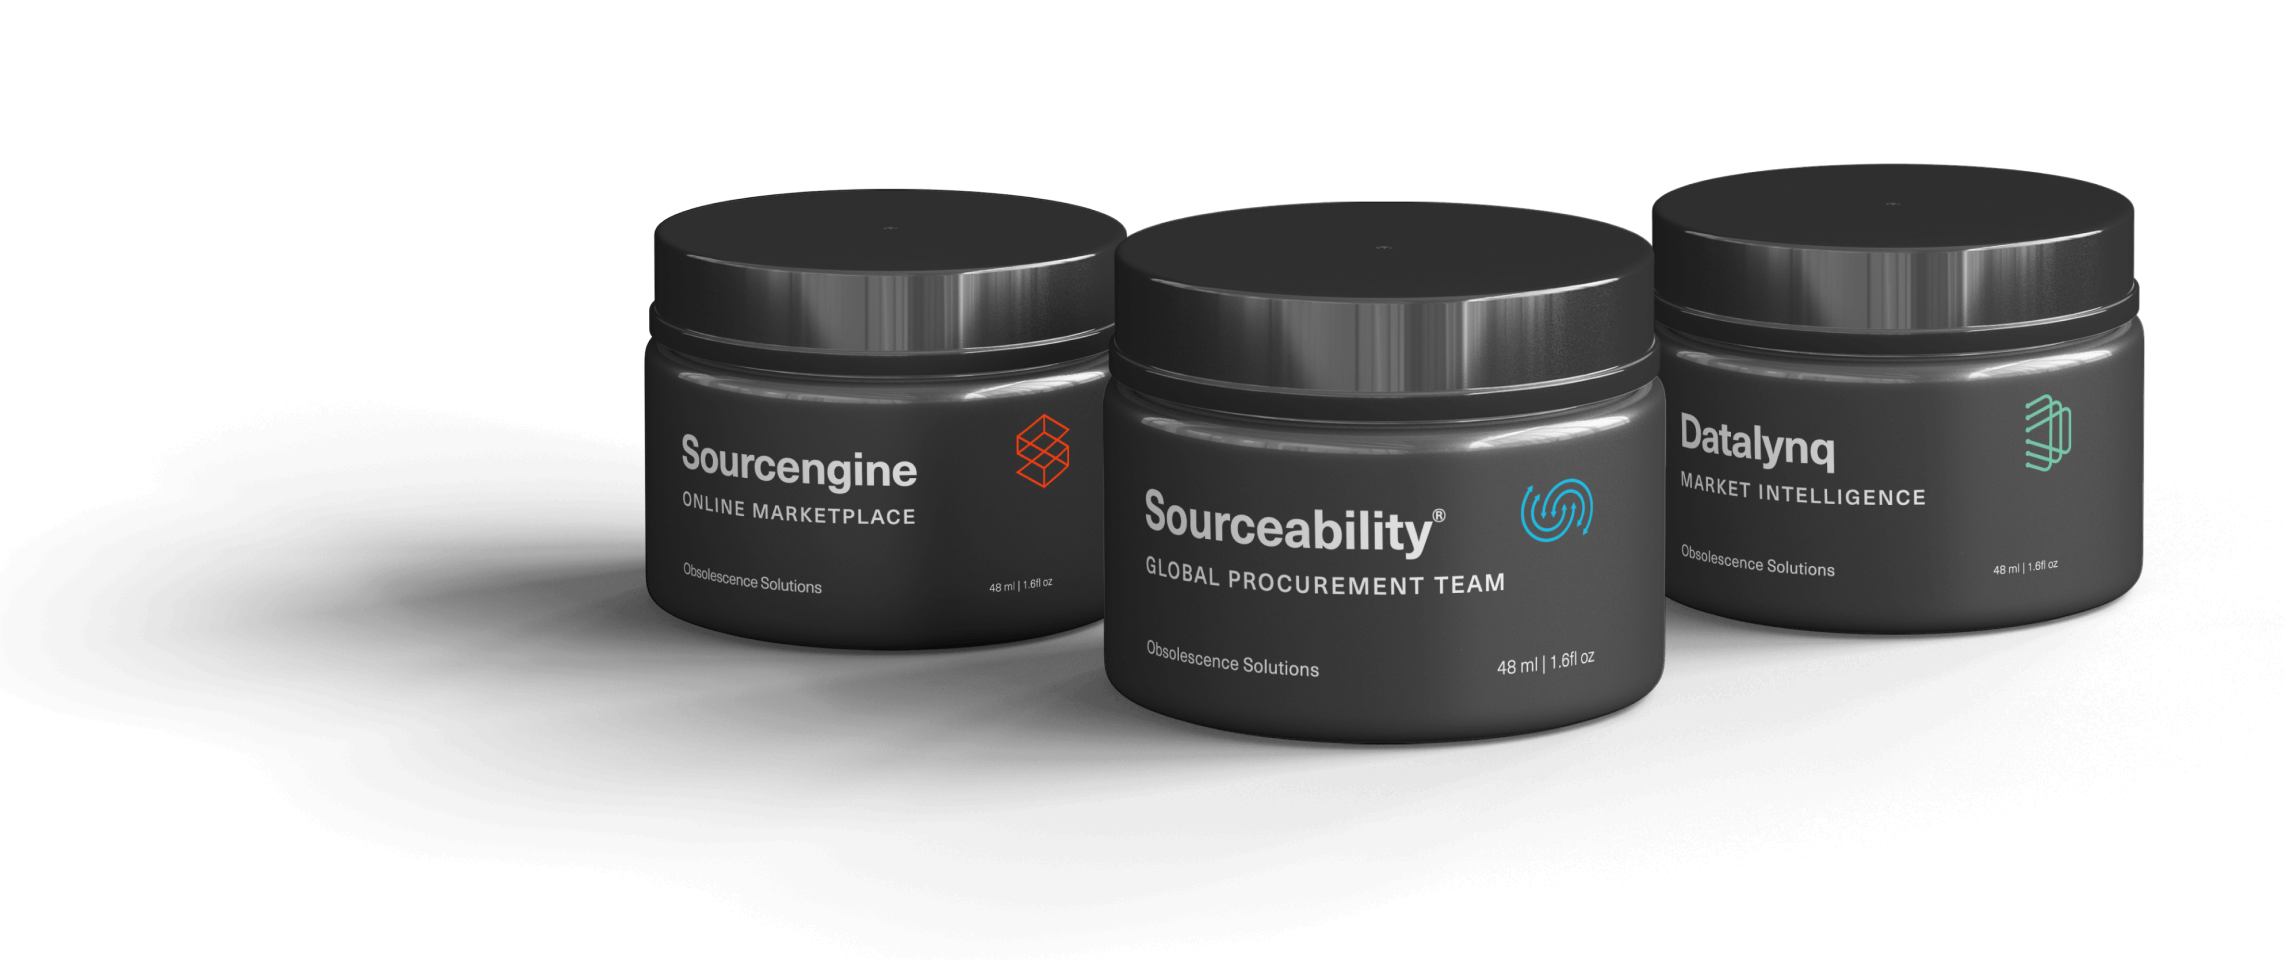 Sourcengine, Sourceability, and Datalynq logos on topical cream containers